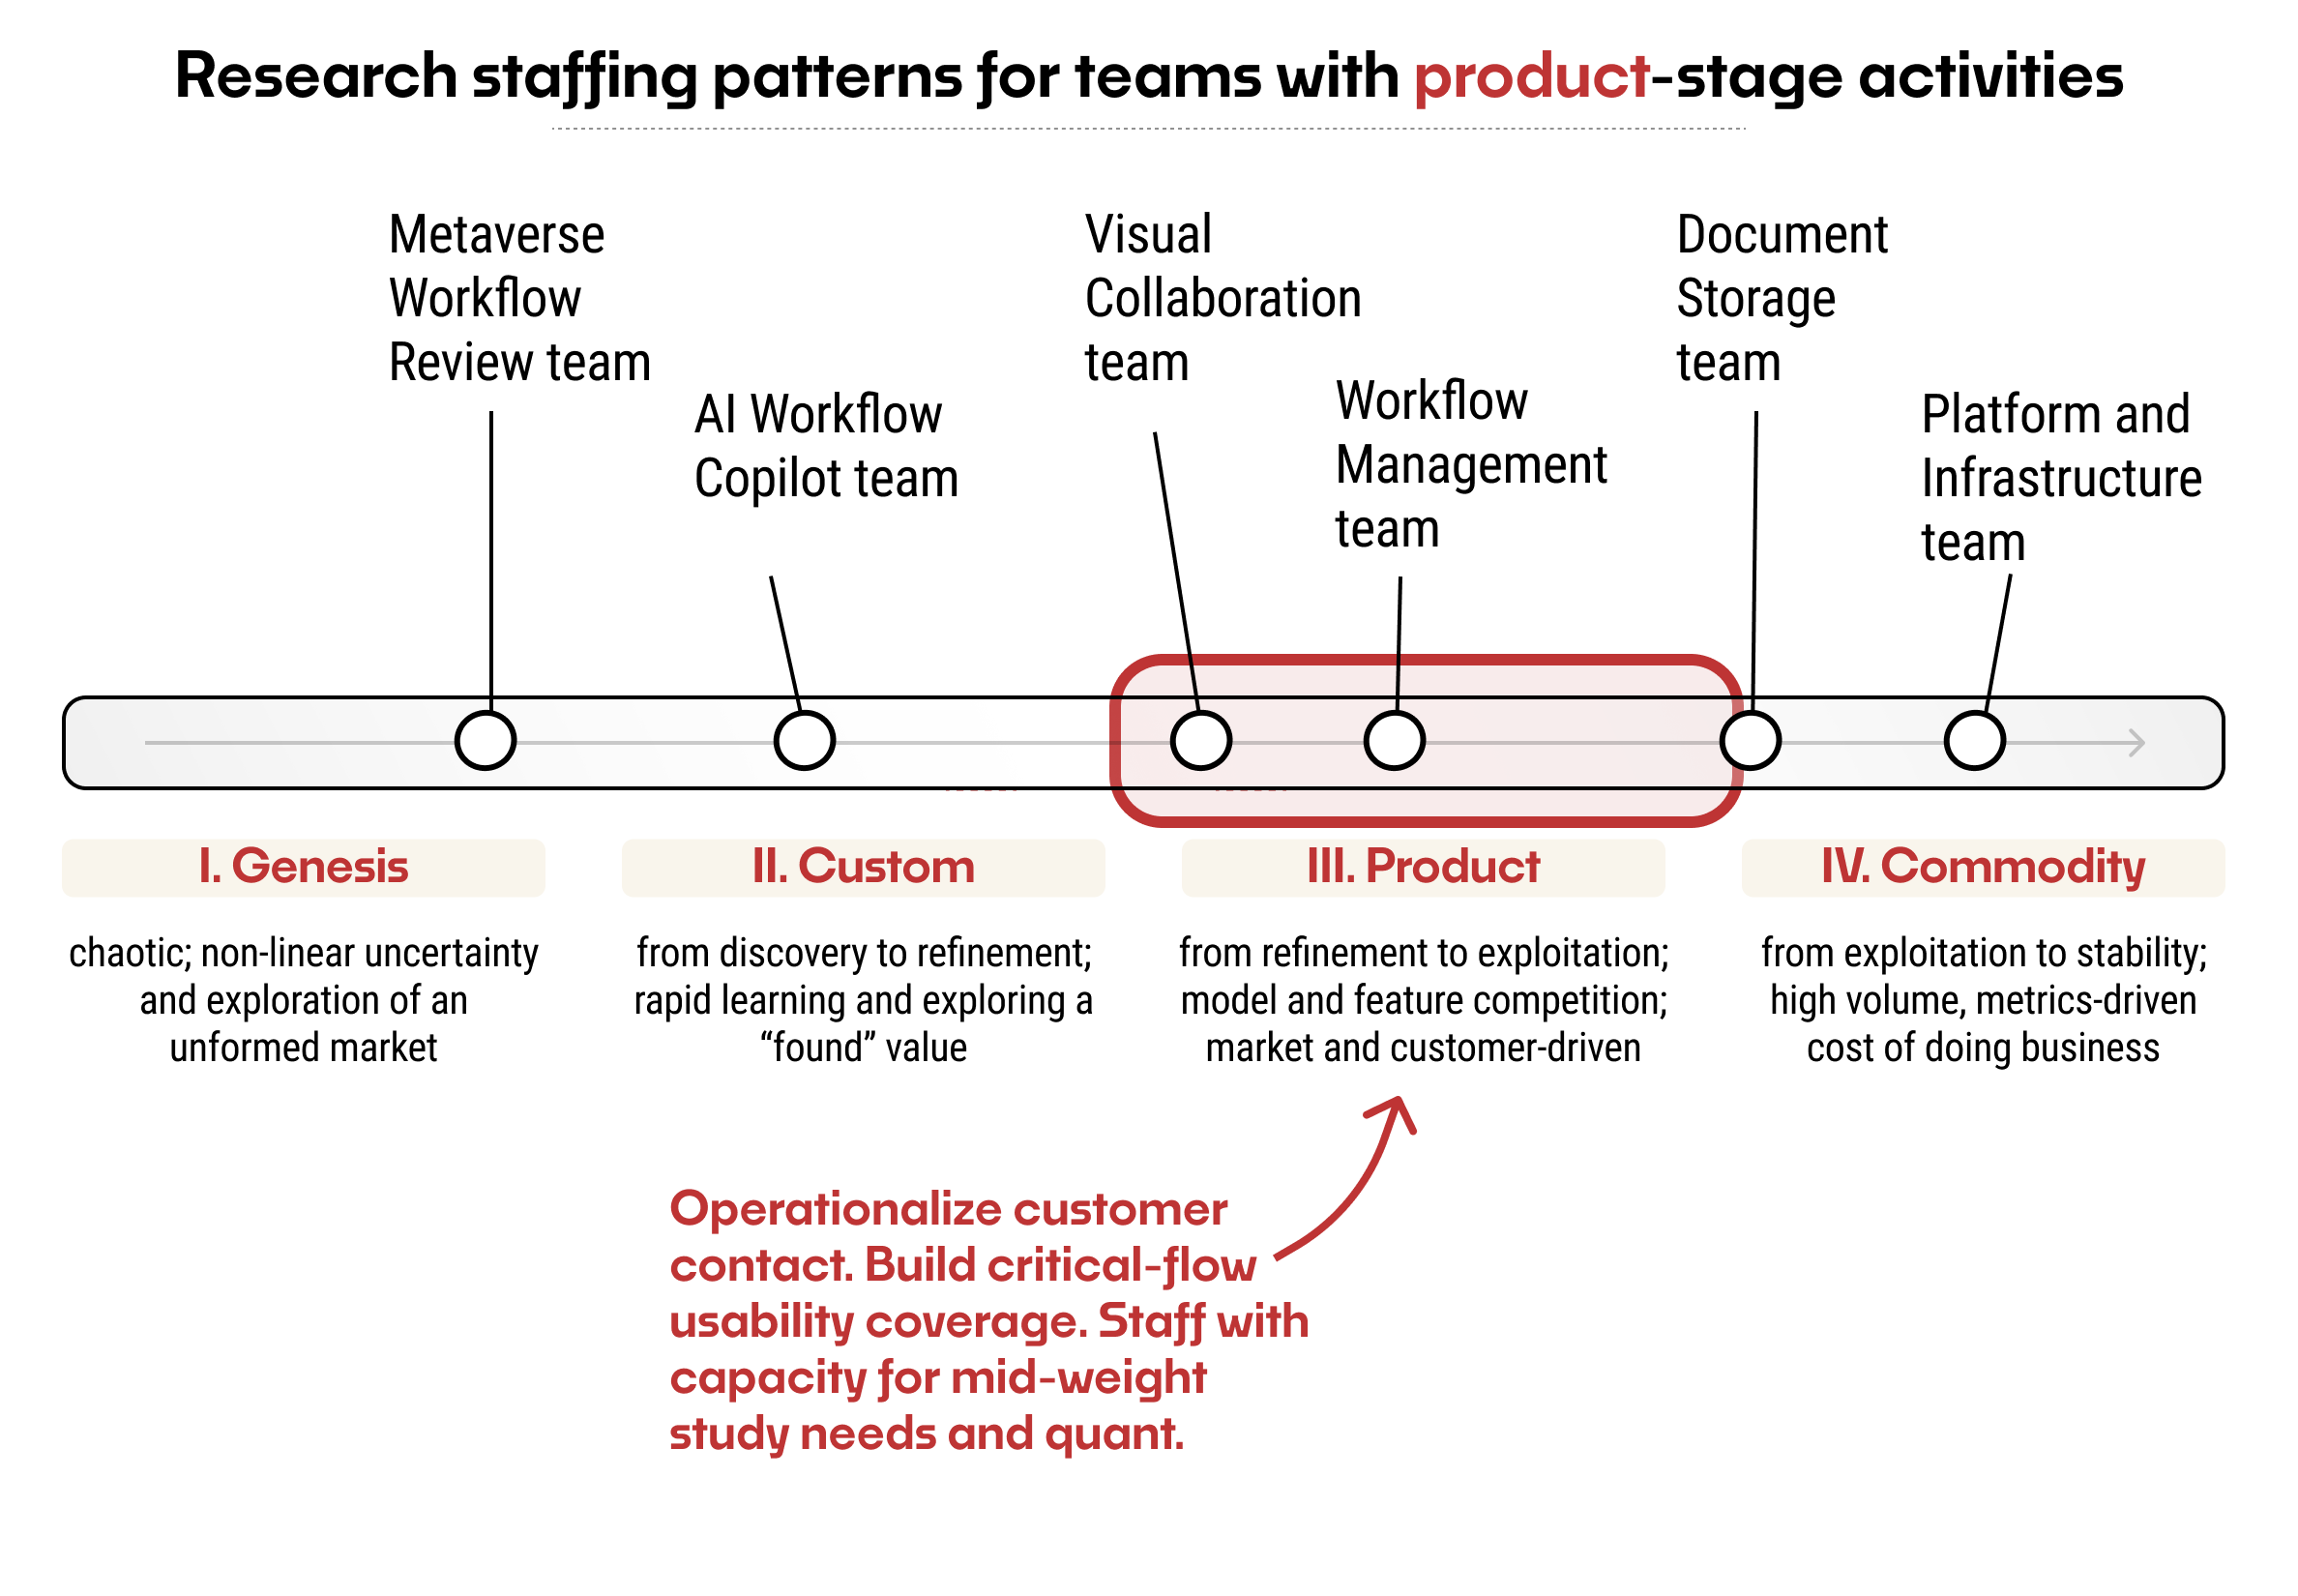 The same spectrum of teams as above, with the product stage highlighted, and a recommendation to: Operationalize customer contact. Build critical-flow usability coverage. Staff with capacity for mid-weight study needs and quant.